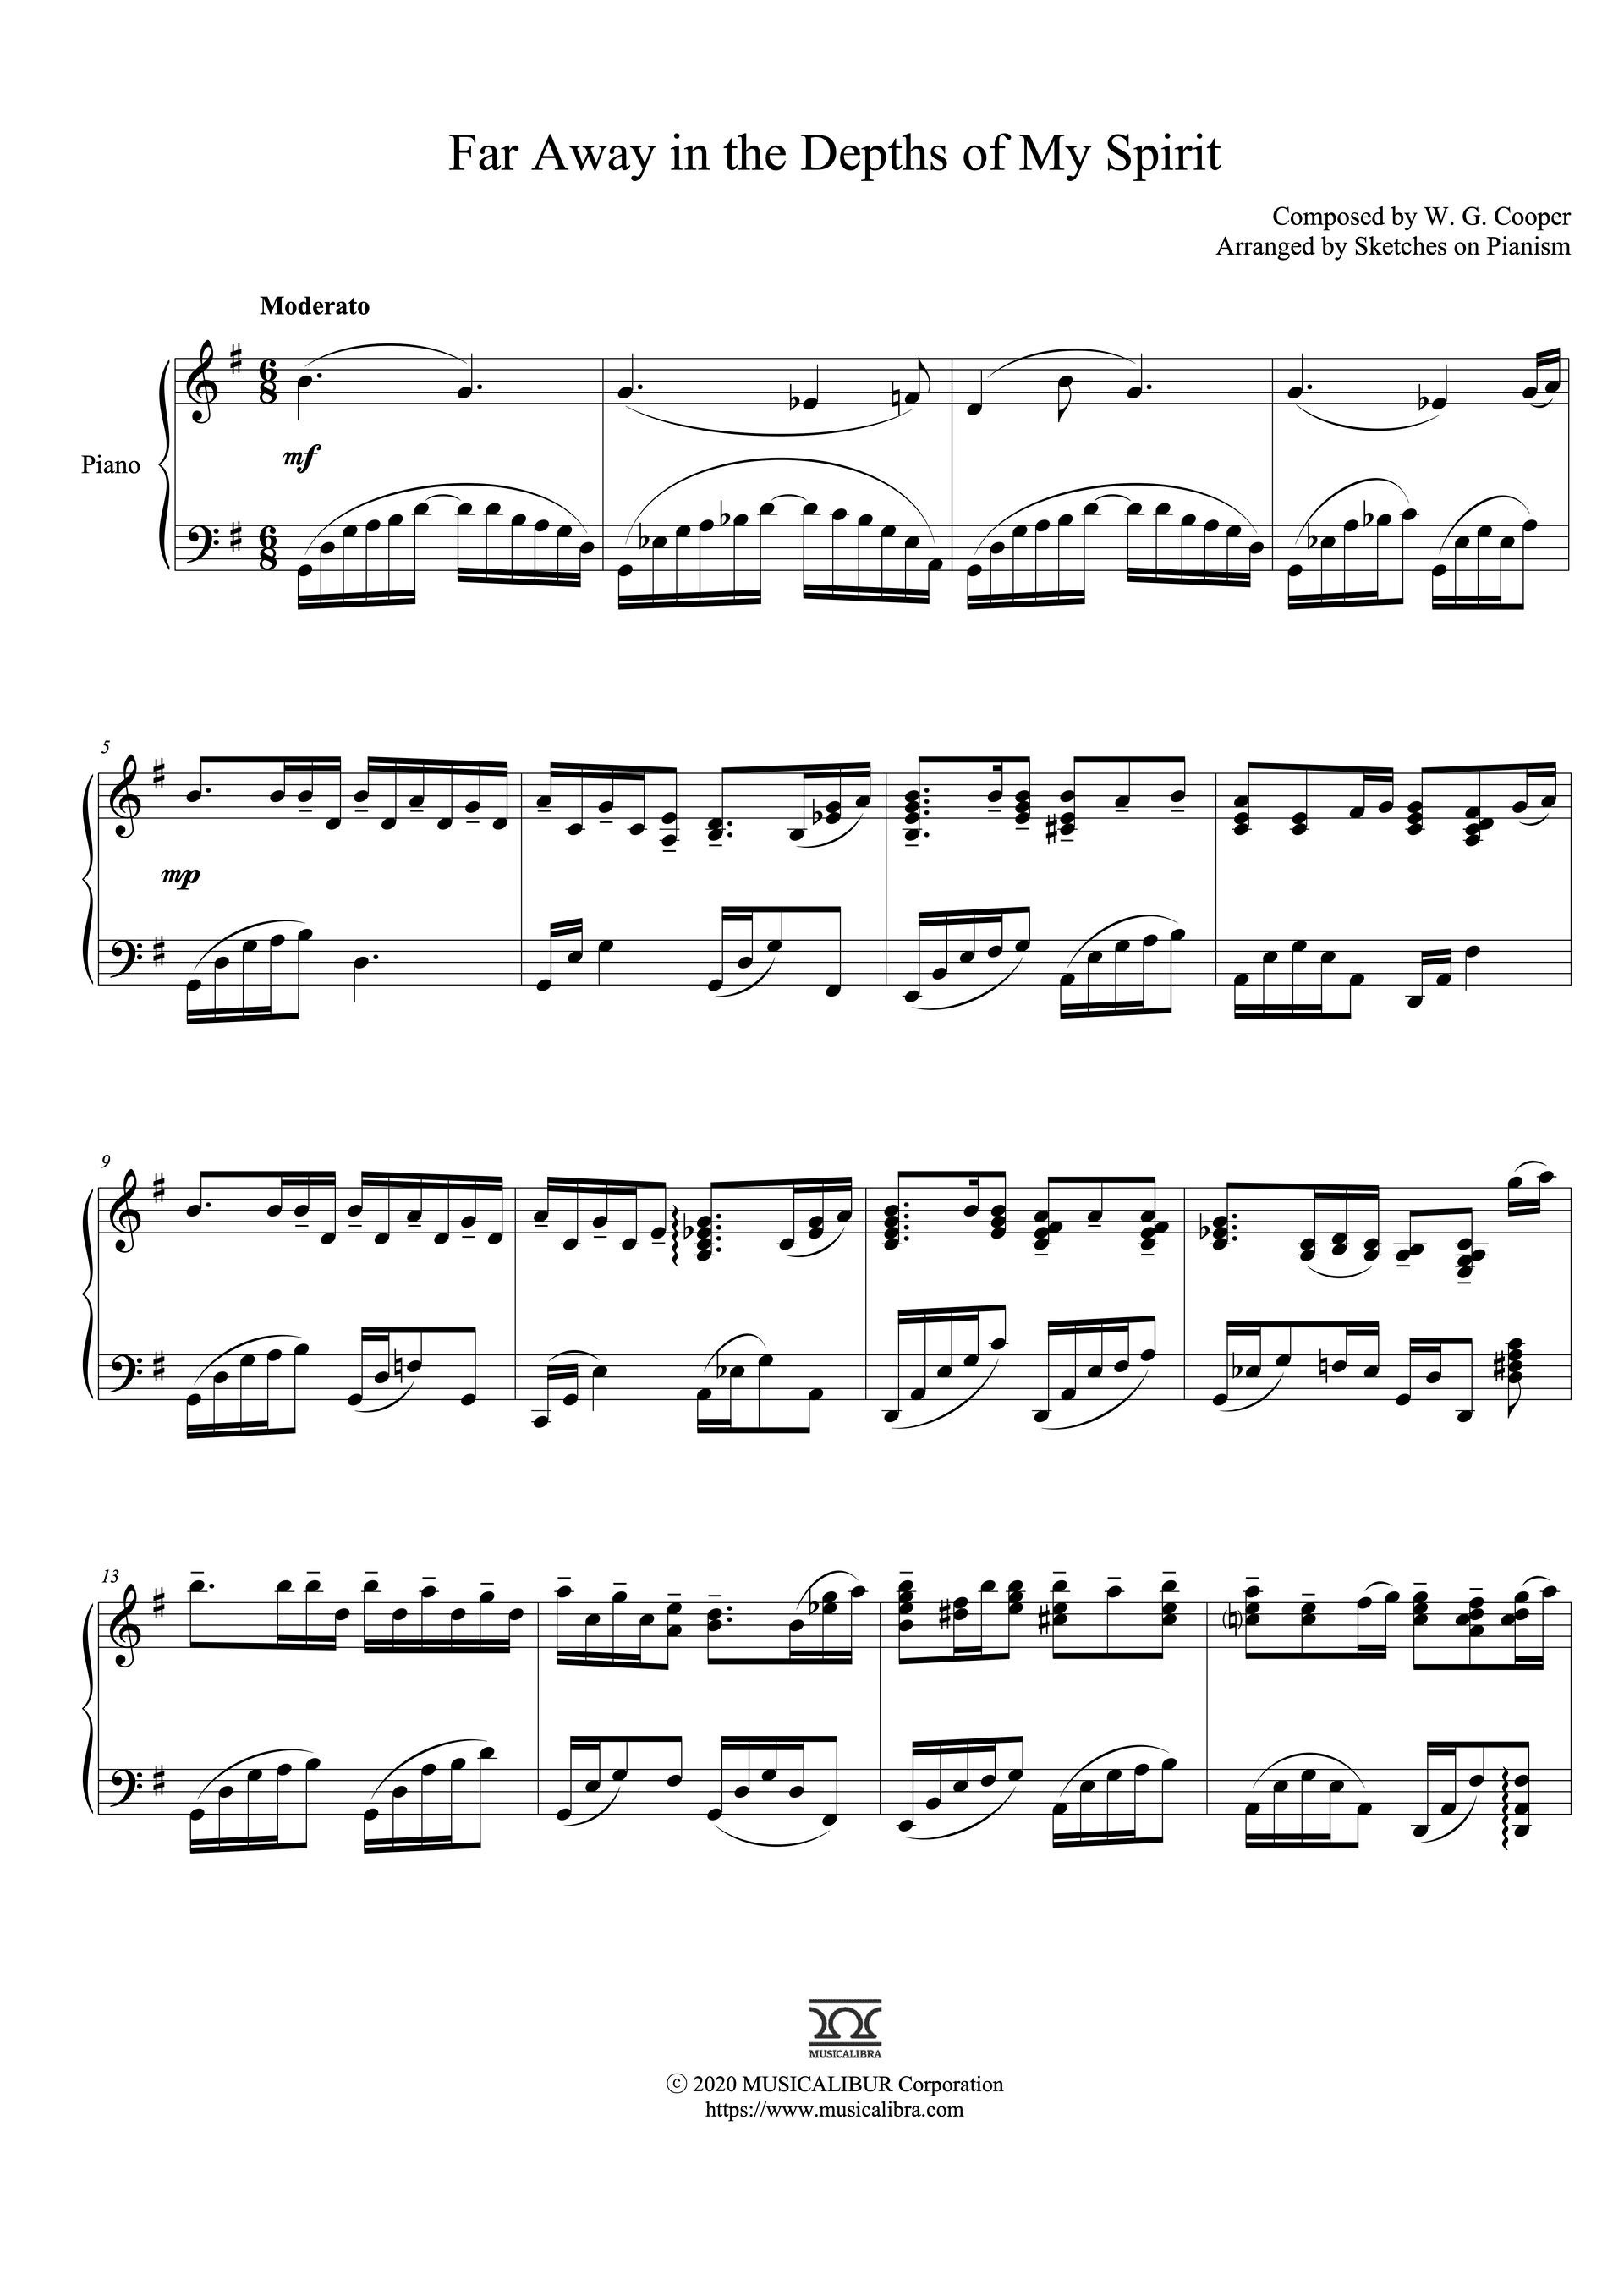 Sheet music of Far Away in the Depths of My Spirit arranged for piano solo preview page 1